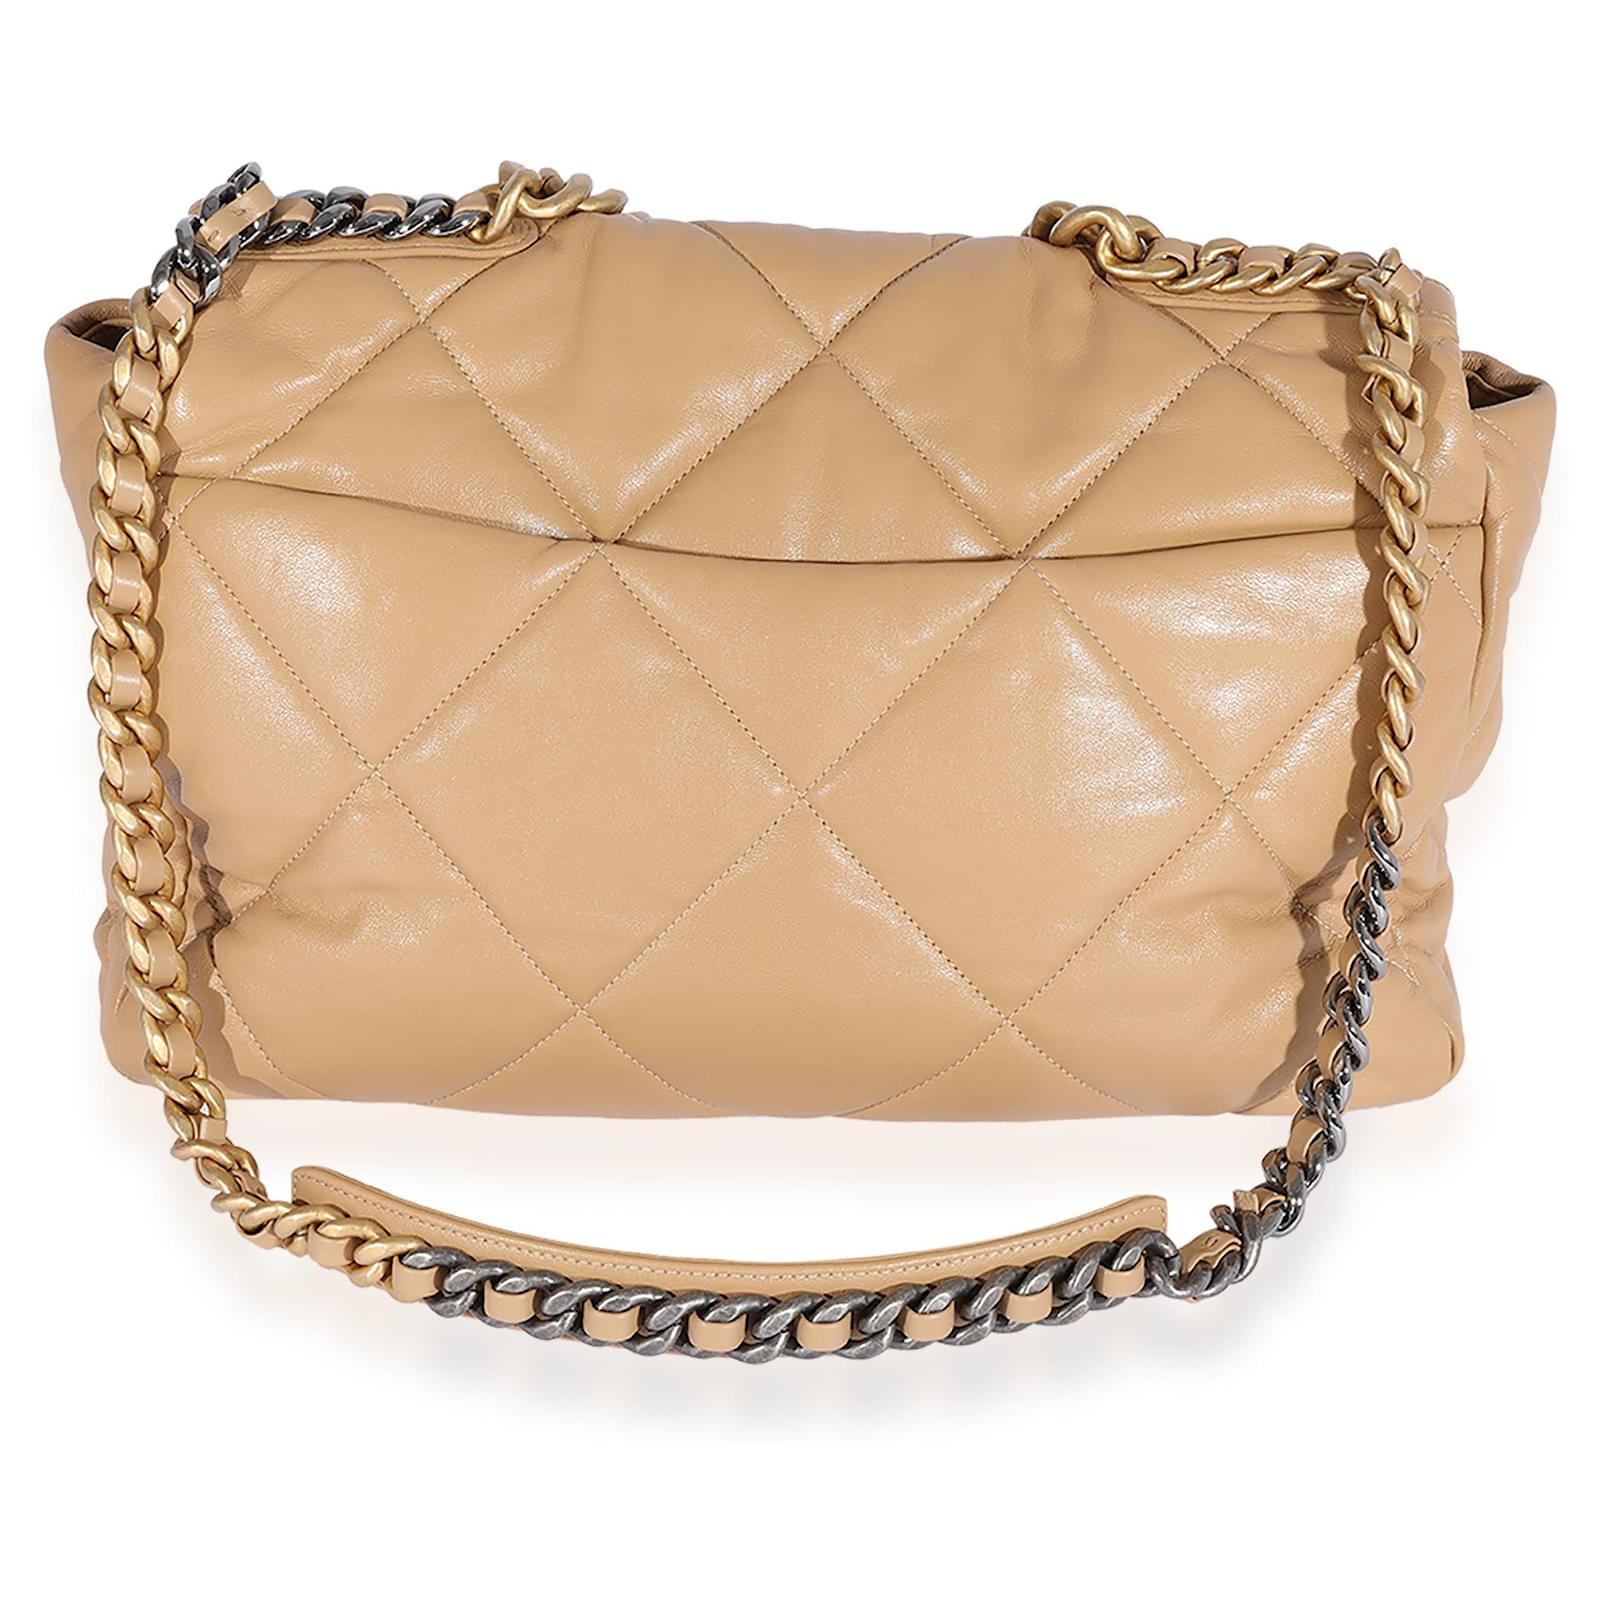 Chanel 19 Maxi Quilted Lambskin Flap Bag